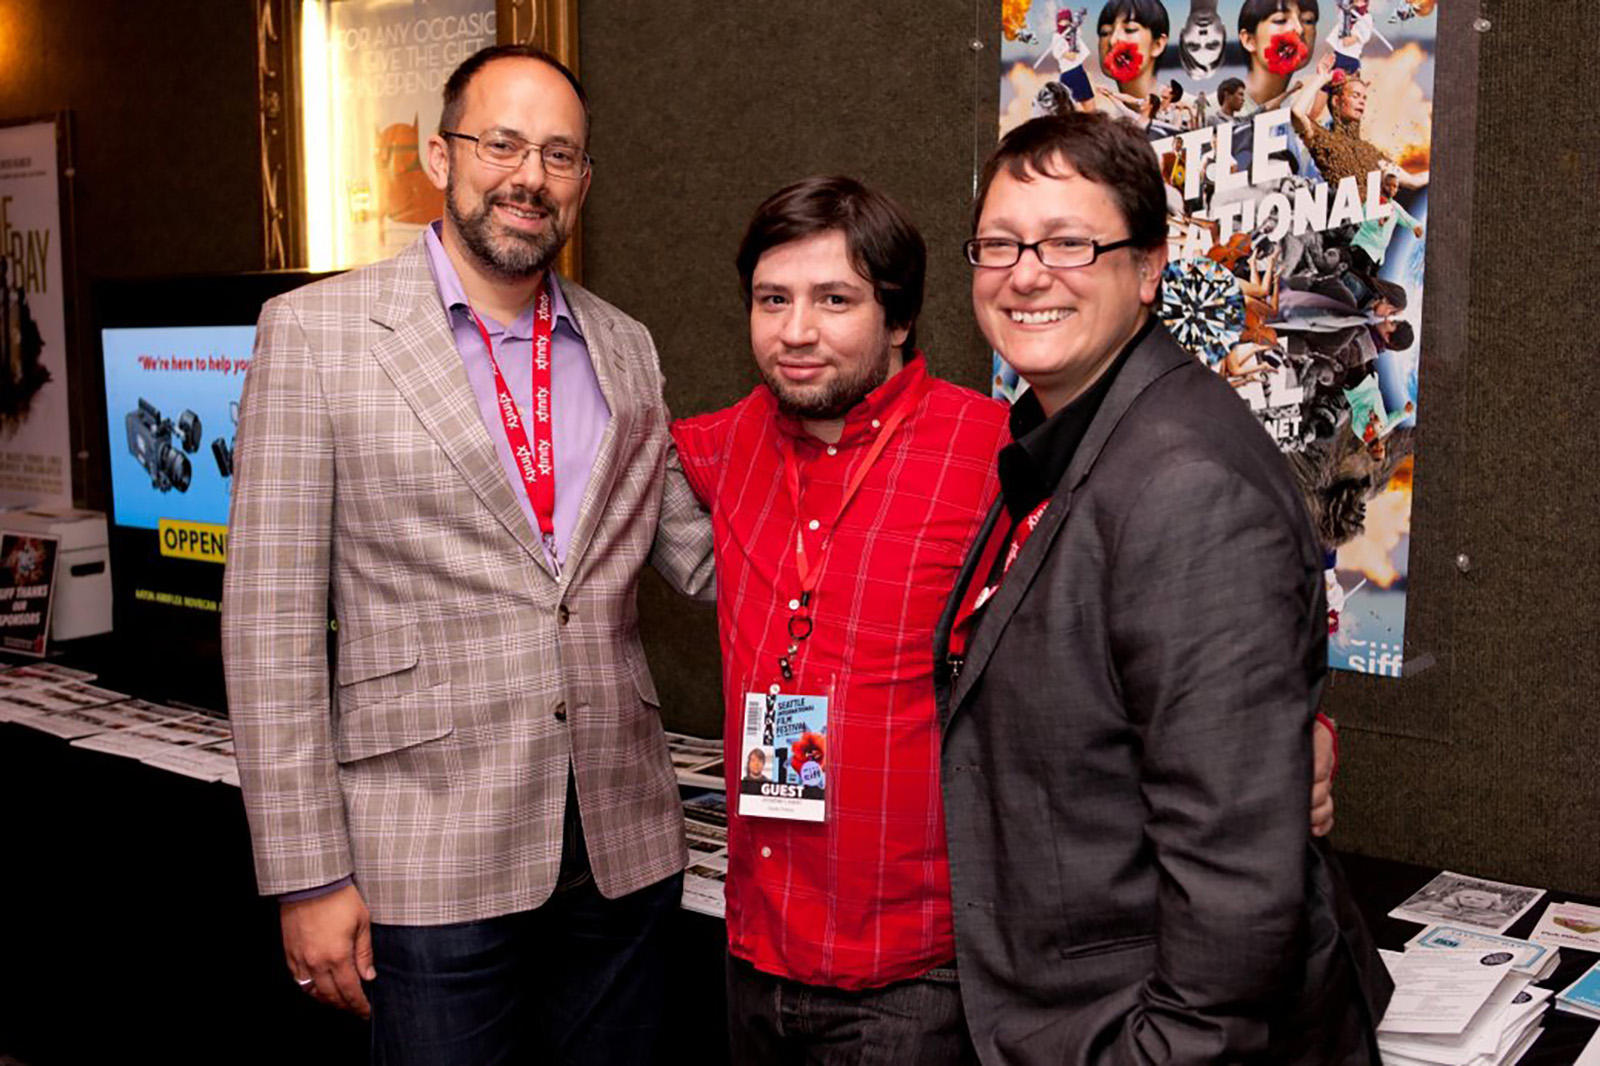 Director, Jonathan Lisecki, poses with SIFF Artistic Director, Carl Spence, and Director of Programming, Beth Barrett (current Artistic Director) at the Gay-La event, which featured a screening of Lisecki's film, Gayby